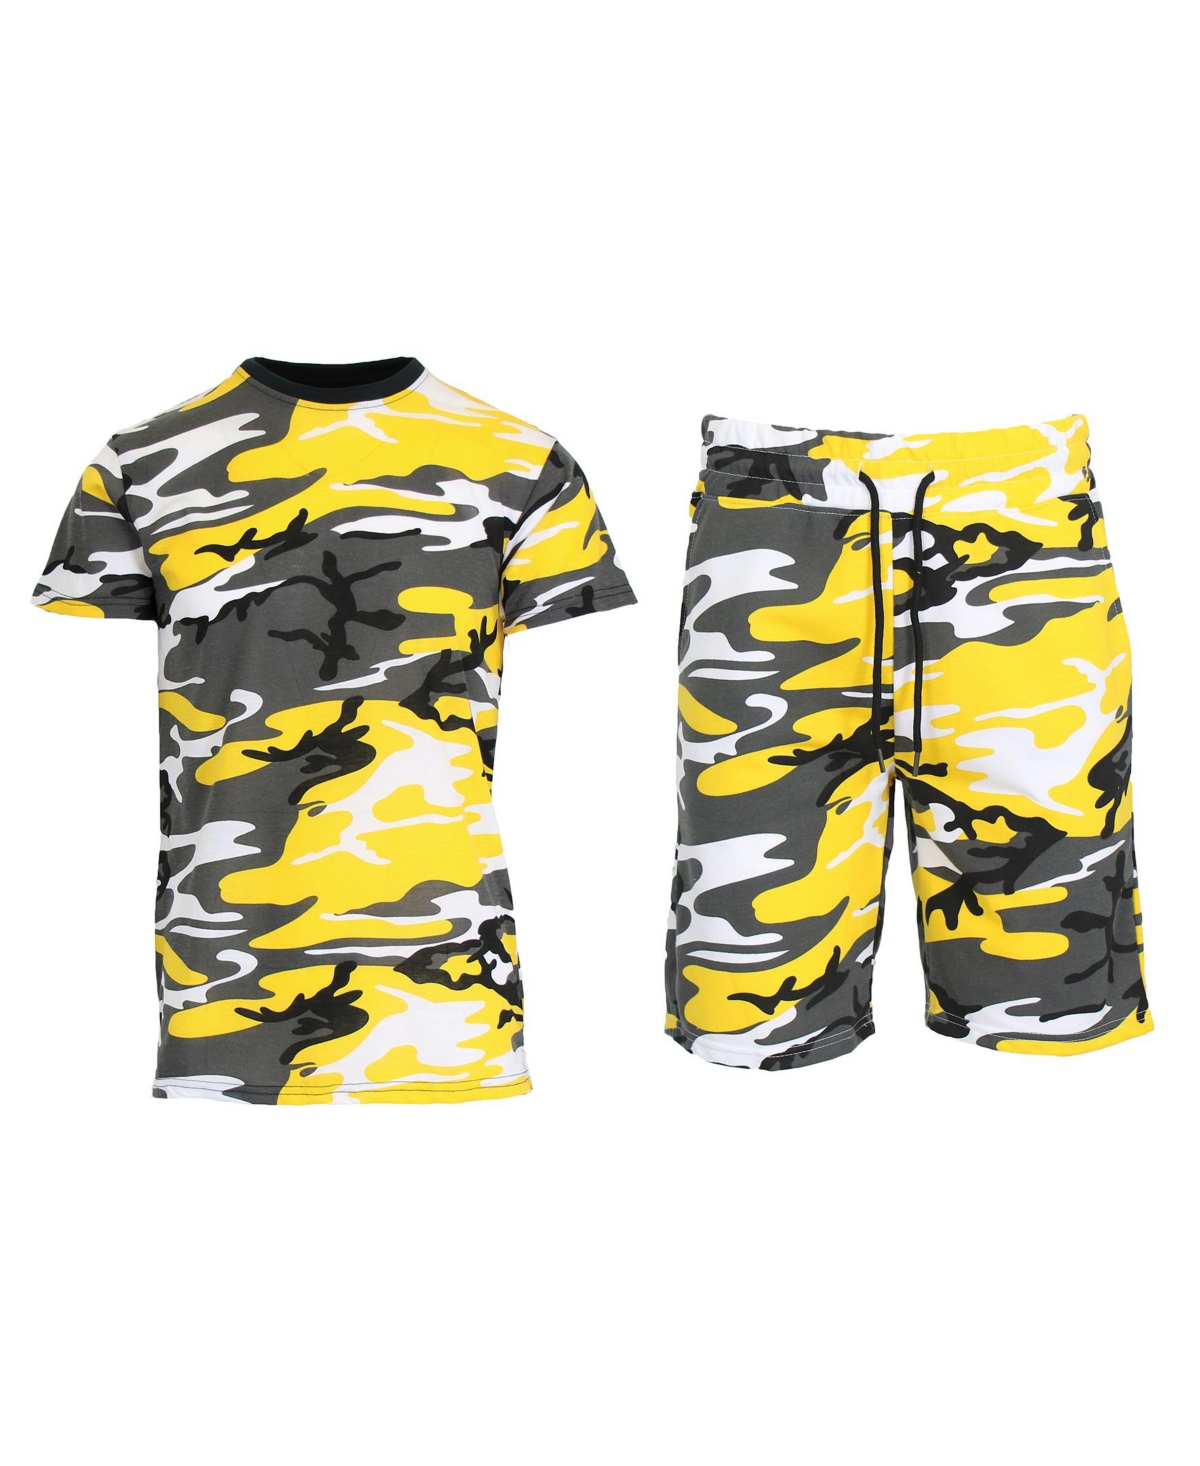 Galaxy By Harvic Men's Camo Short Sleeve T-shirt And Shorts, 2-piece Set In Yellow Camo